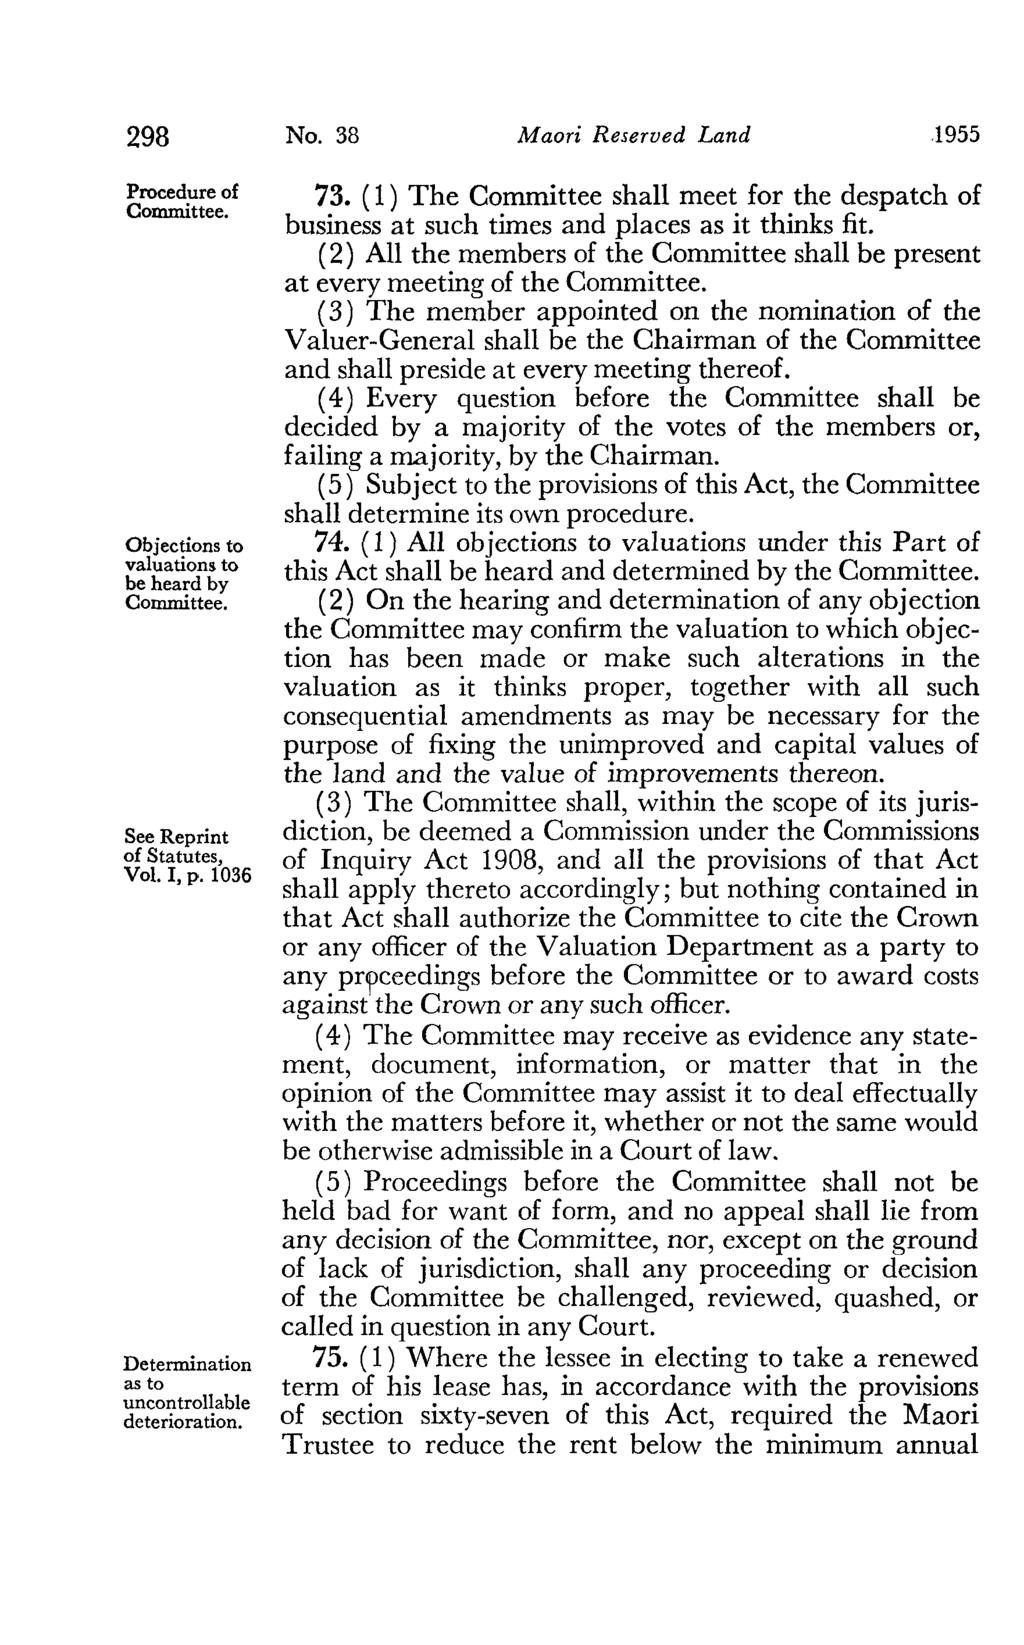 298 Procedure of Committee. Objections to valuations to be heard by Committee. See Reprint of Statutes, Vol. I, p. 1036 Determination as to uncontrollable deterioration. No.